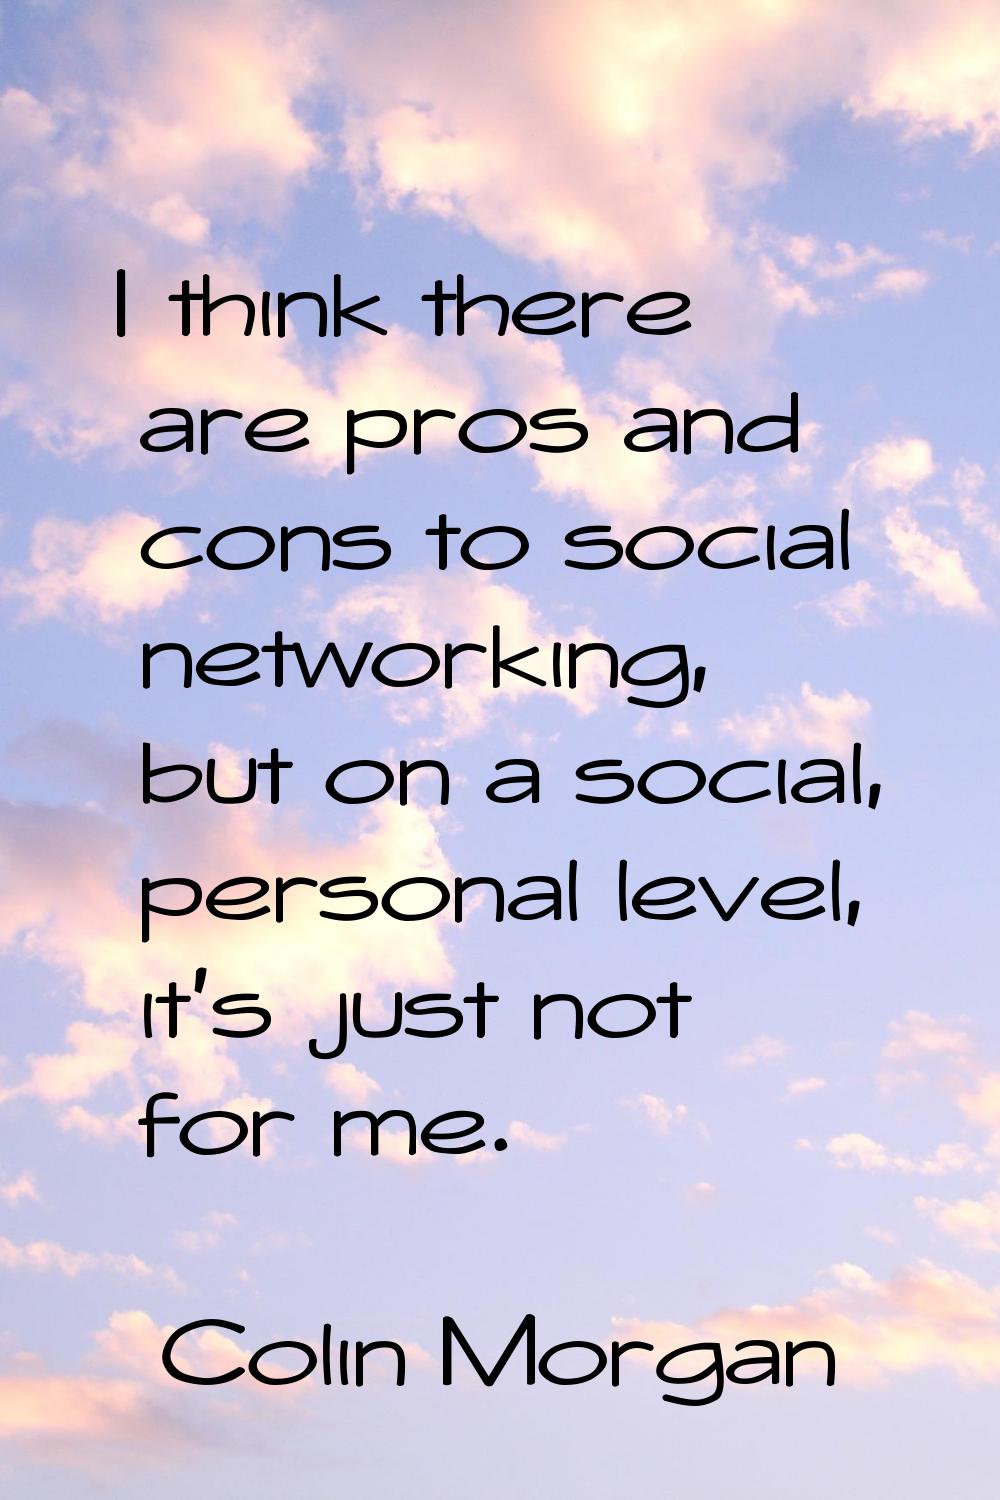 I think there are pros and cons to social networking, but on a social, personal level, it's just no